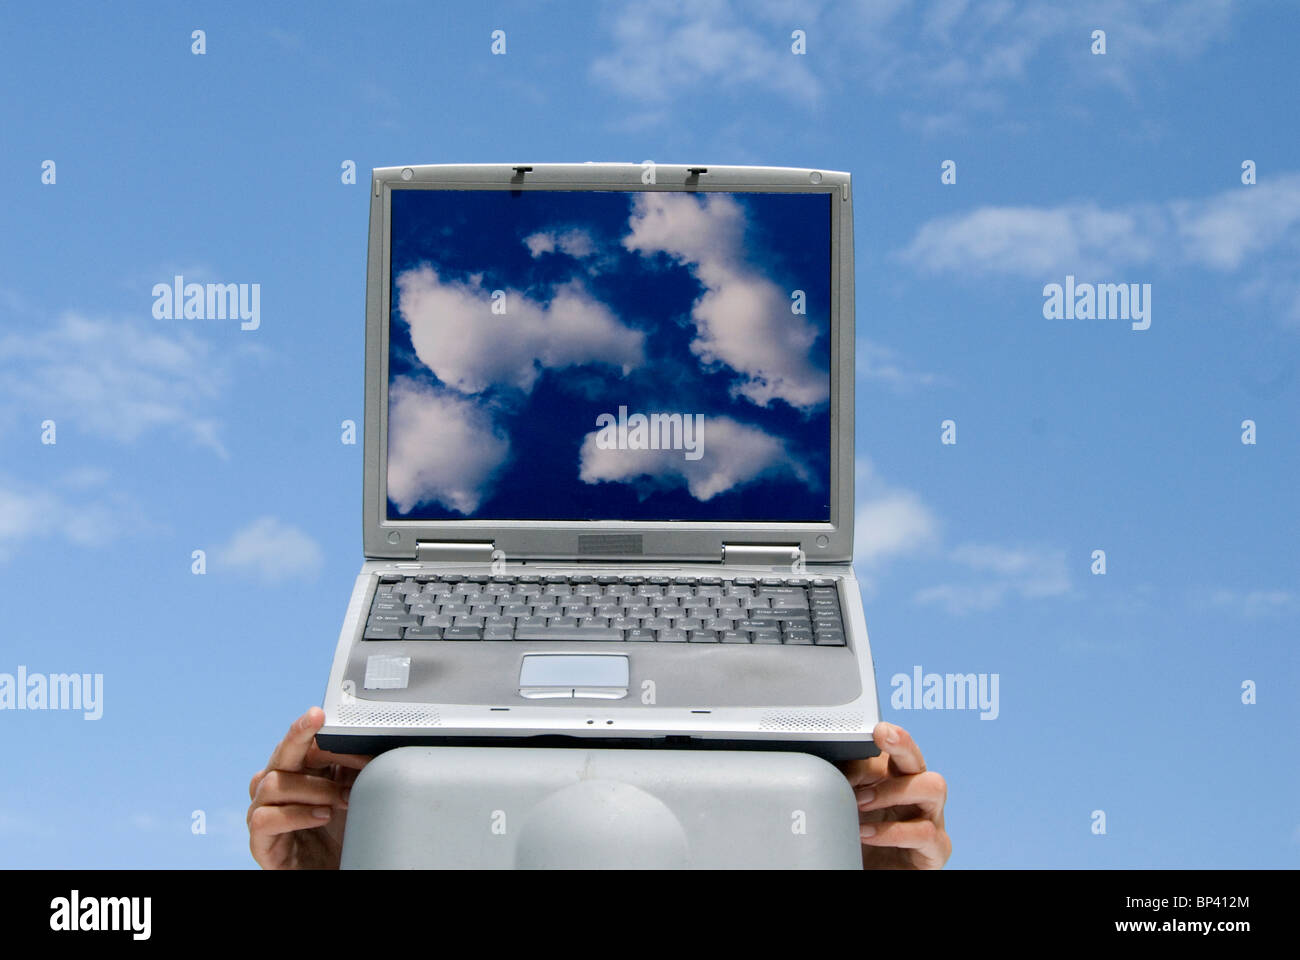 laptop computer with cloud images and clouds in background representing cloud computing Stock Photo